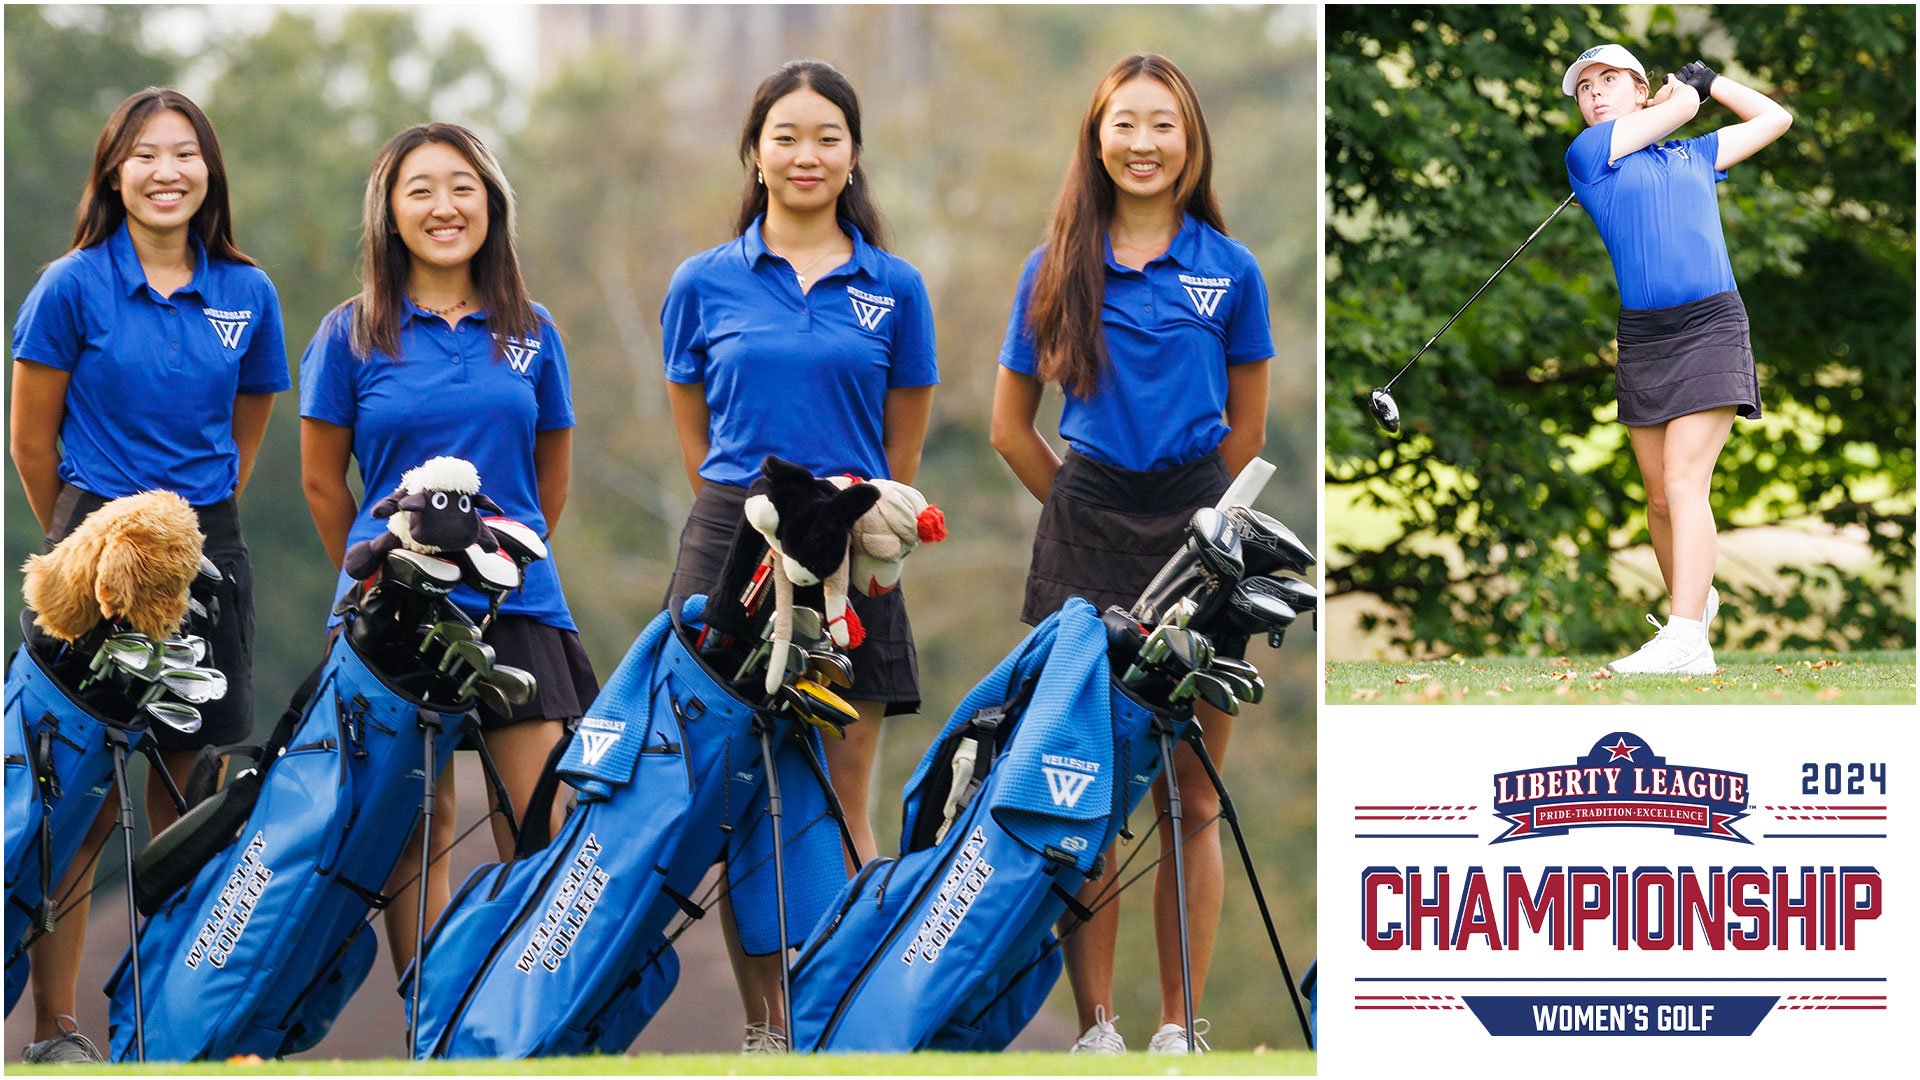 Wellesley golf will compete the Liberty League Women's Golf Championships on April 27-28 (Frank Poulin)